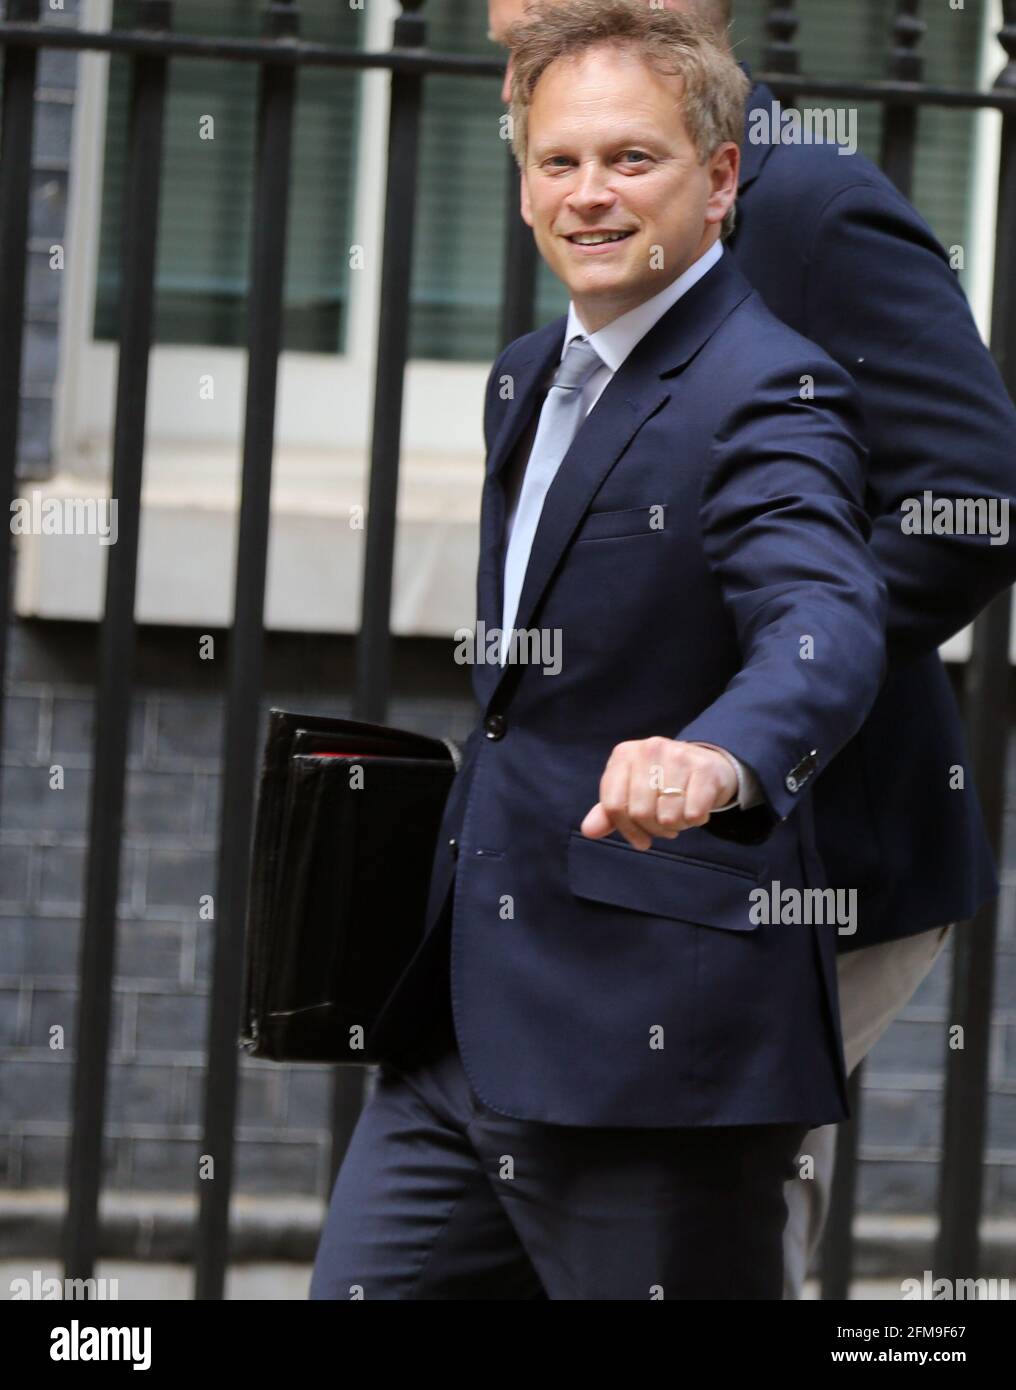 London, England, UK. 7th May, 2021. UK Secretary of State for Transport GRANT SHAPPS arrives in Downing Street ahead of the press conference he is expected to announce traffic light system covid-19 risk categorisation of countries. The UK prepares to lift the ban o foreign travel on 17th May but some popular holiday destinations are expected to be in amber and red list in the new system, so people travelling there will heave to go into quarantine for 5 to 10 days. Credit: Tayfun Salci/ZUMA Wire/Alamy Live News Stock Photo